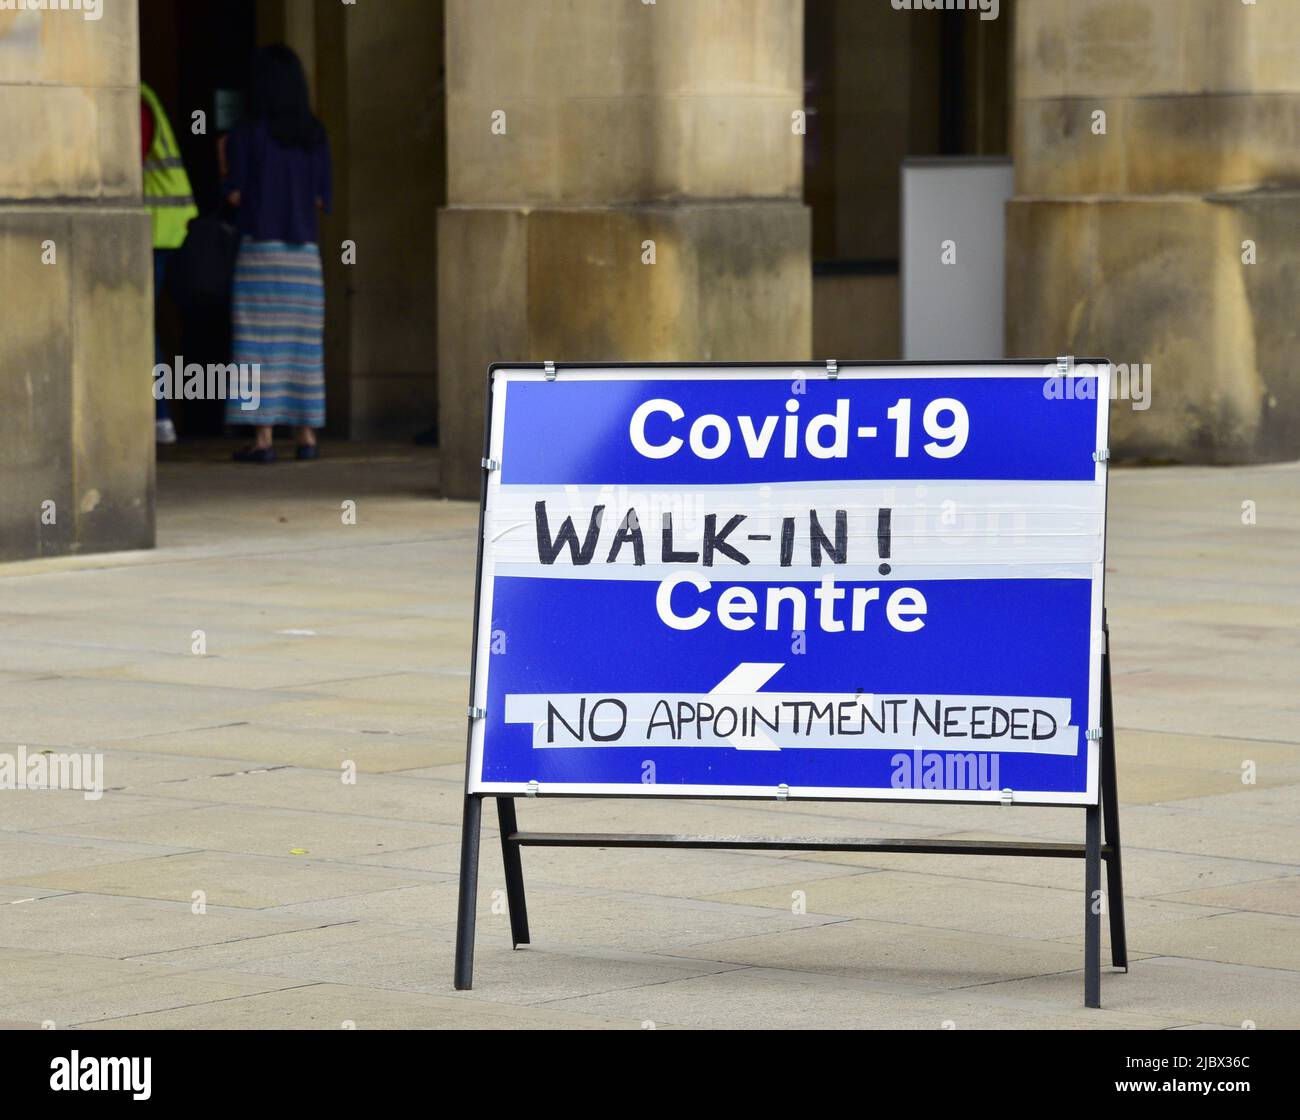 Sign for walk in centre to get vaccine to protect against Covid-19 or Covid or Coronavirus at the Town Hall in Manchester, England, United Kingdom. Stock Photo